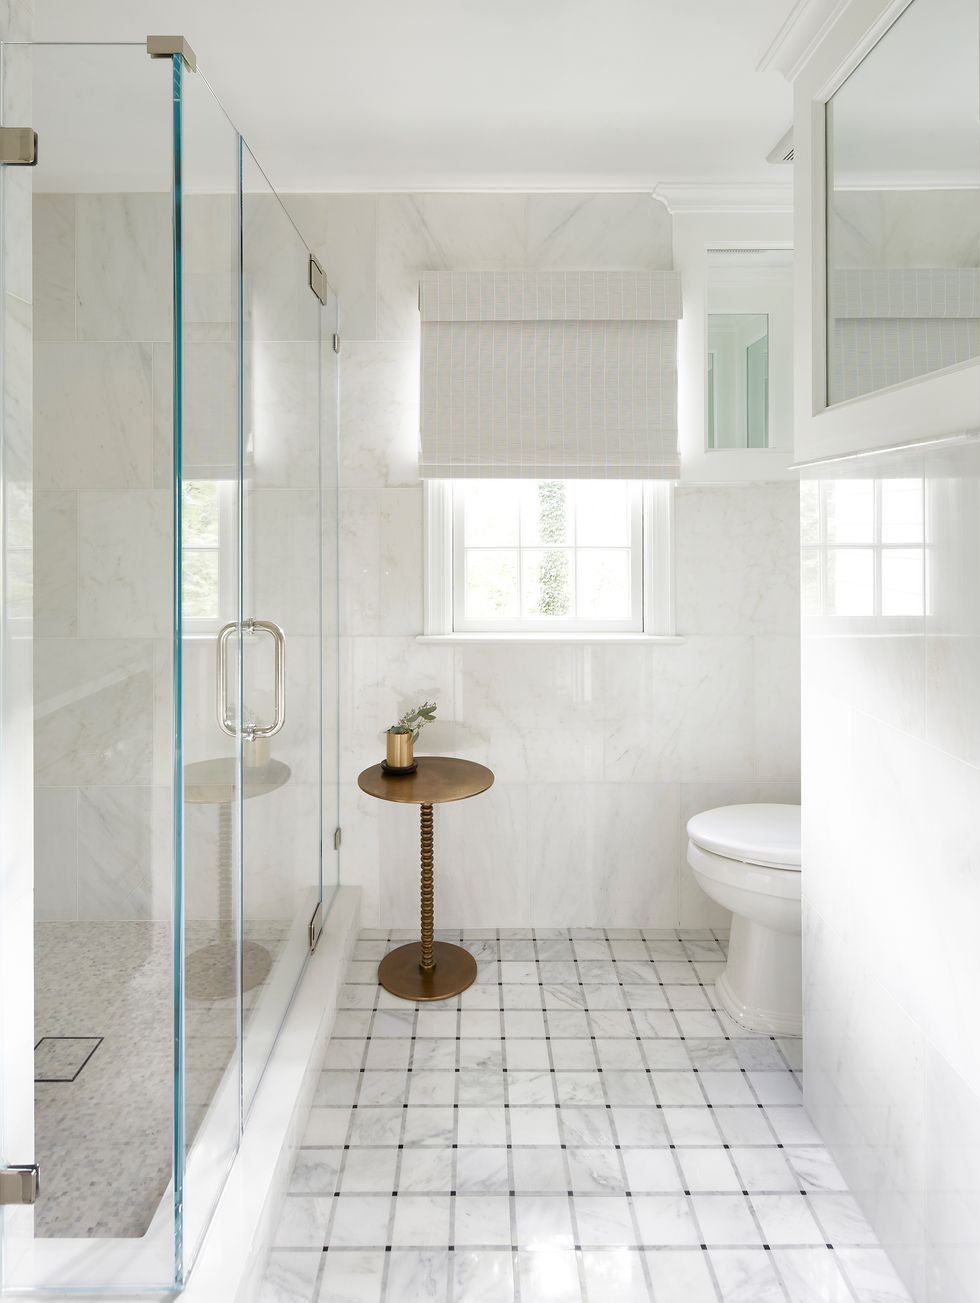 35 Beautiful Shower Ideas to Inspire Your Bathroom Remodel